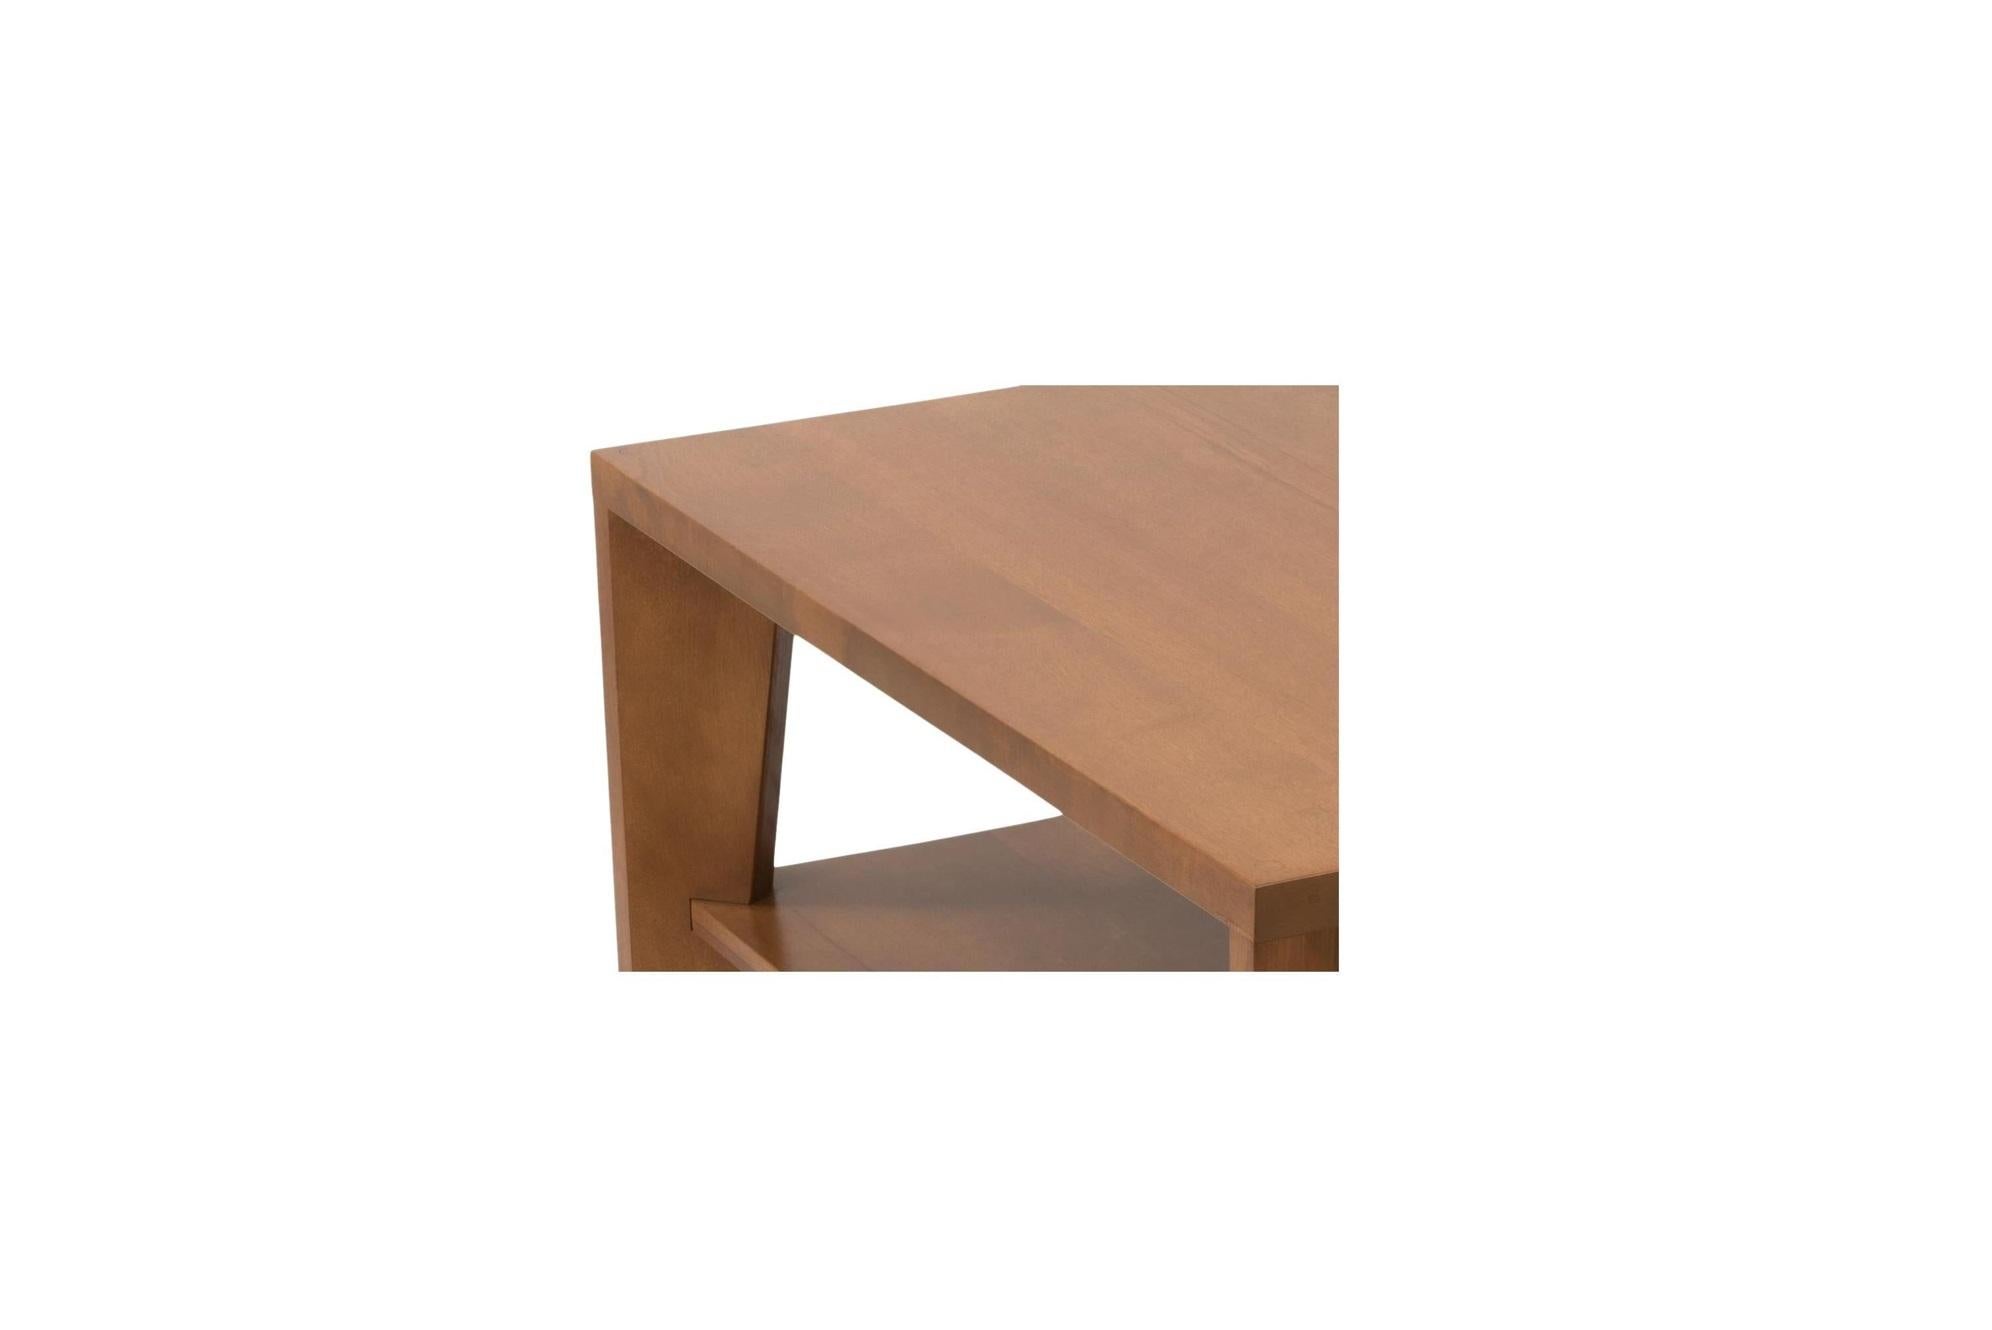 Wood Modernist Russel Wright Square Tables by Conant Ball For Sale